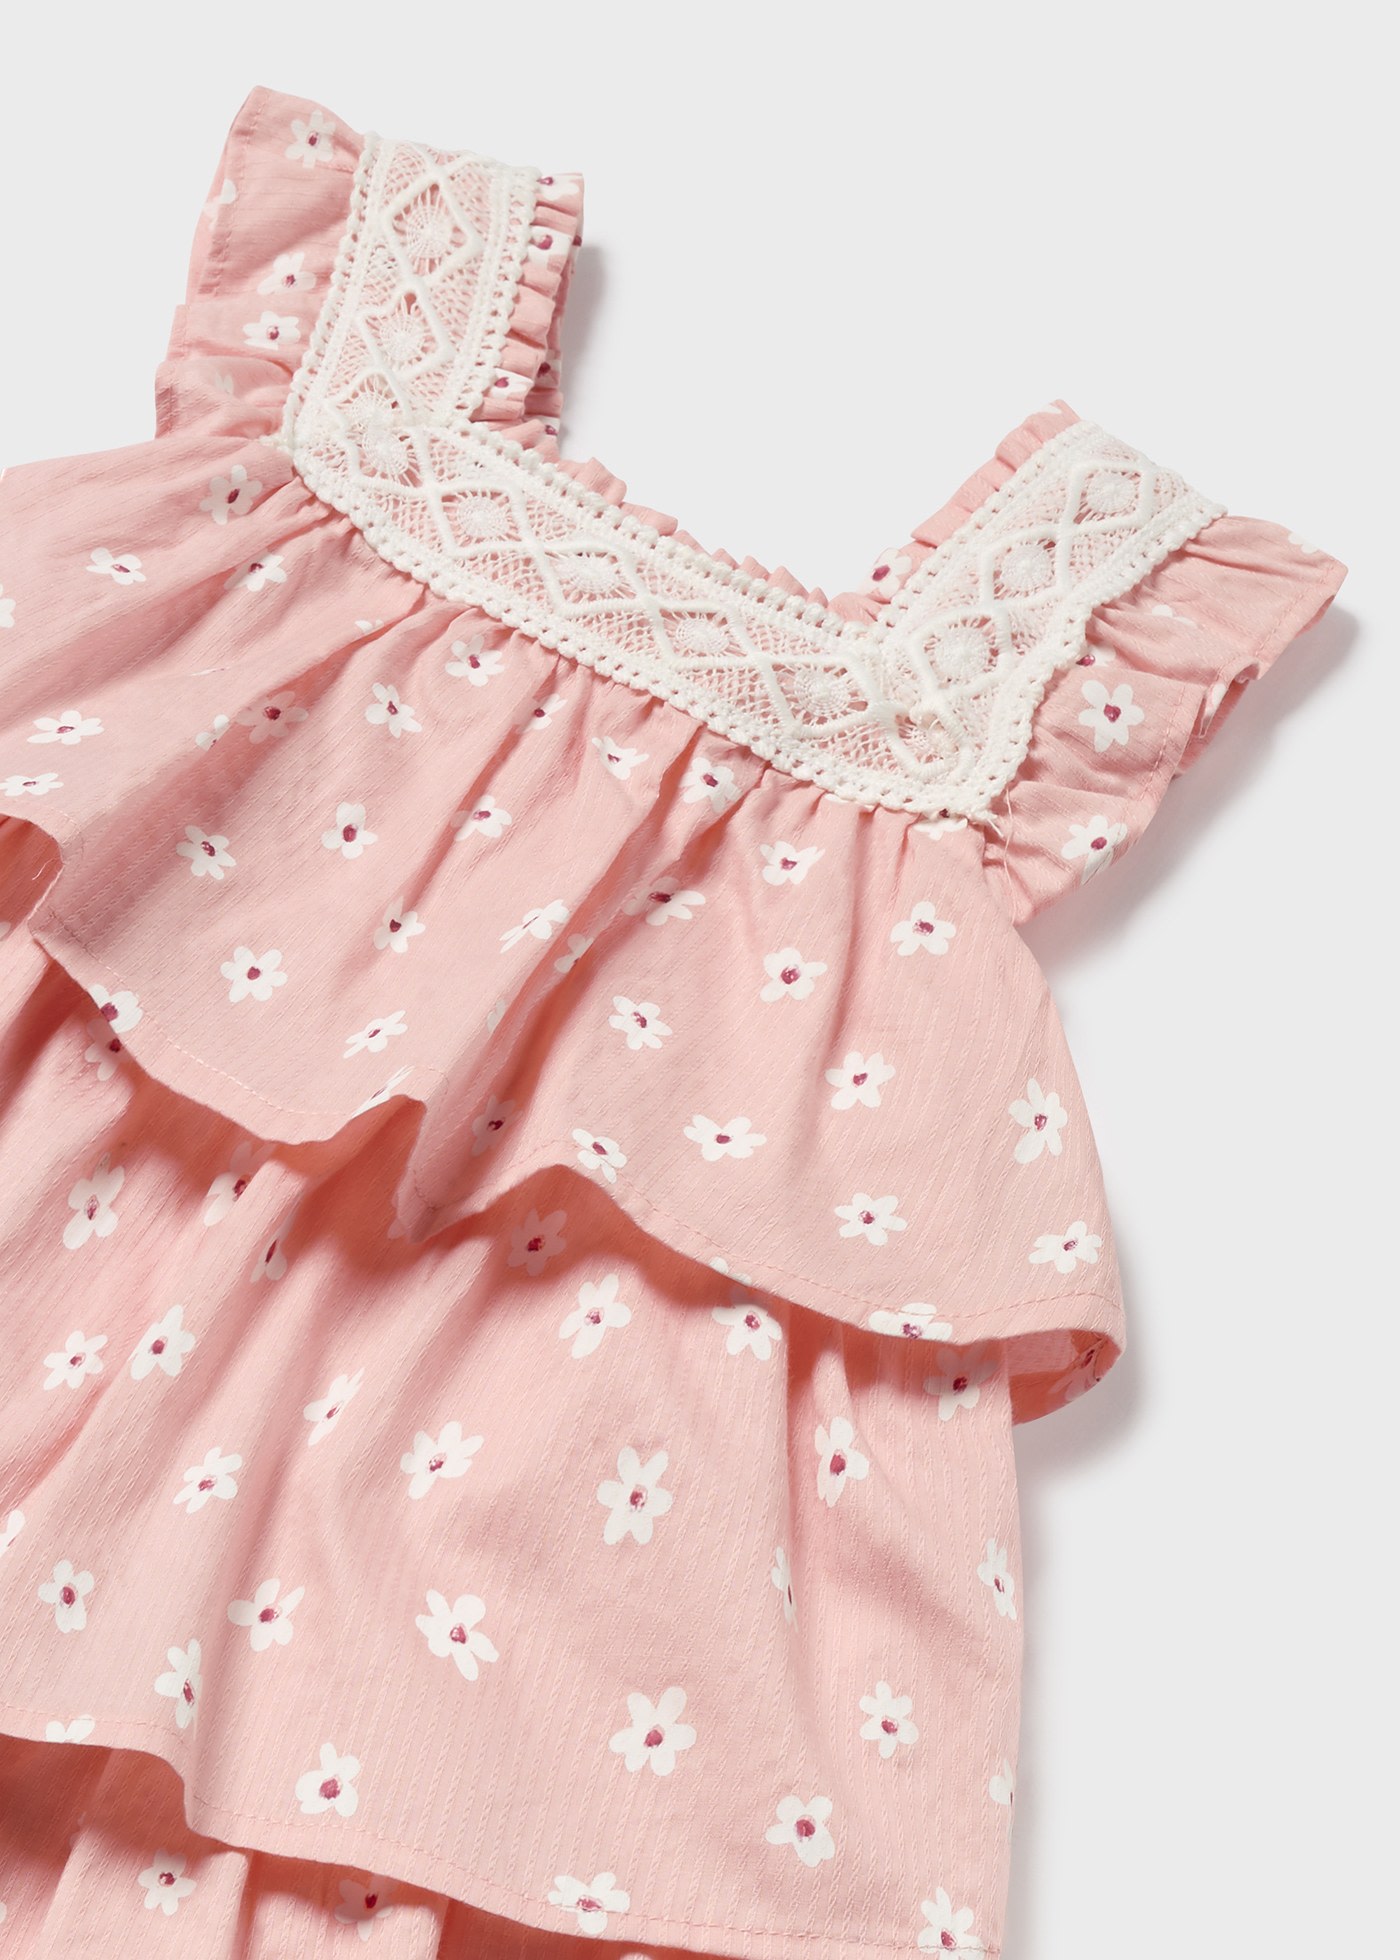 Baby Floral Ruffle Dress